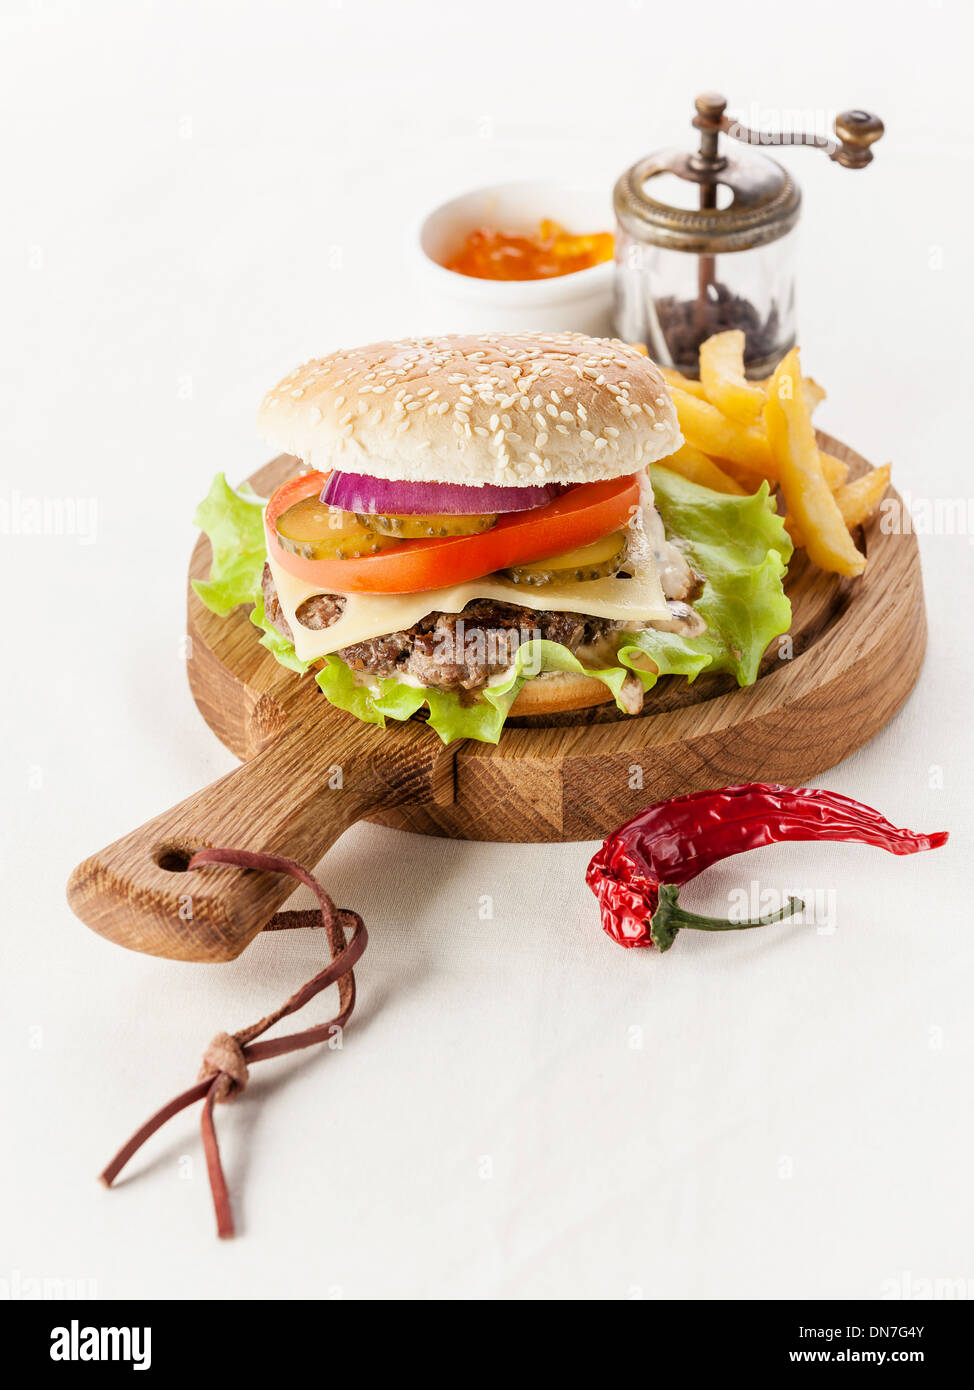 Burger with meat and greens and Salted french fries Stock Photo